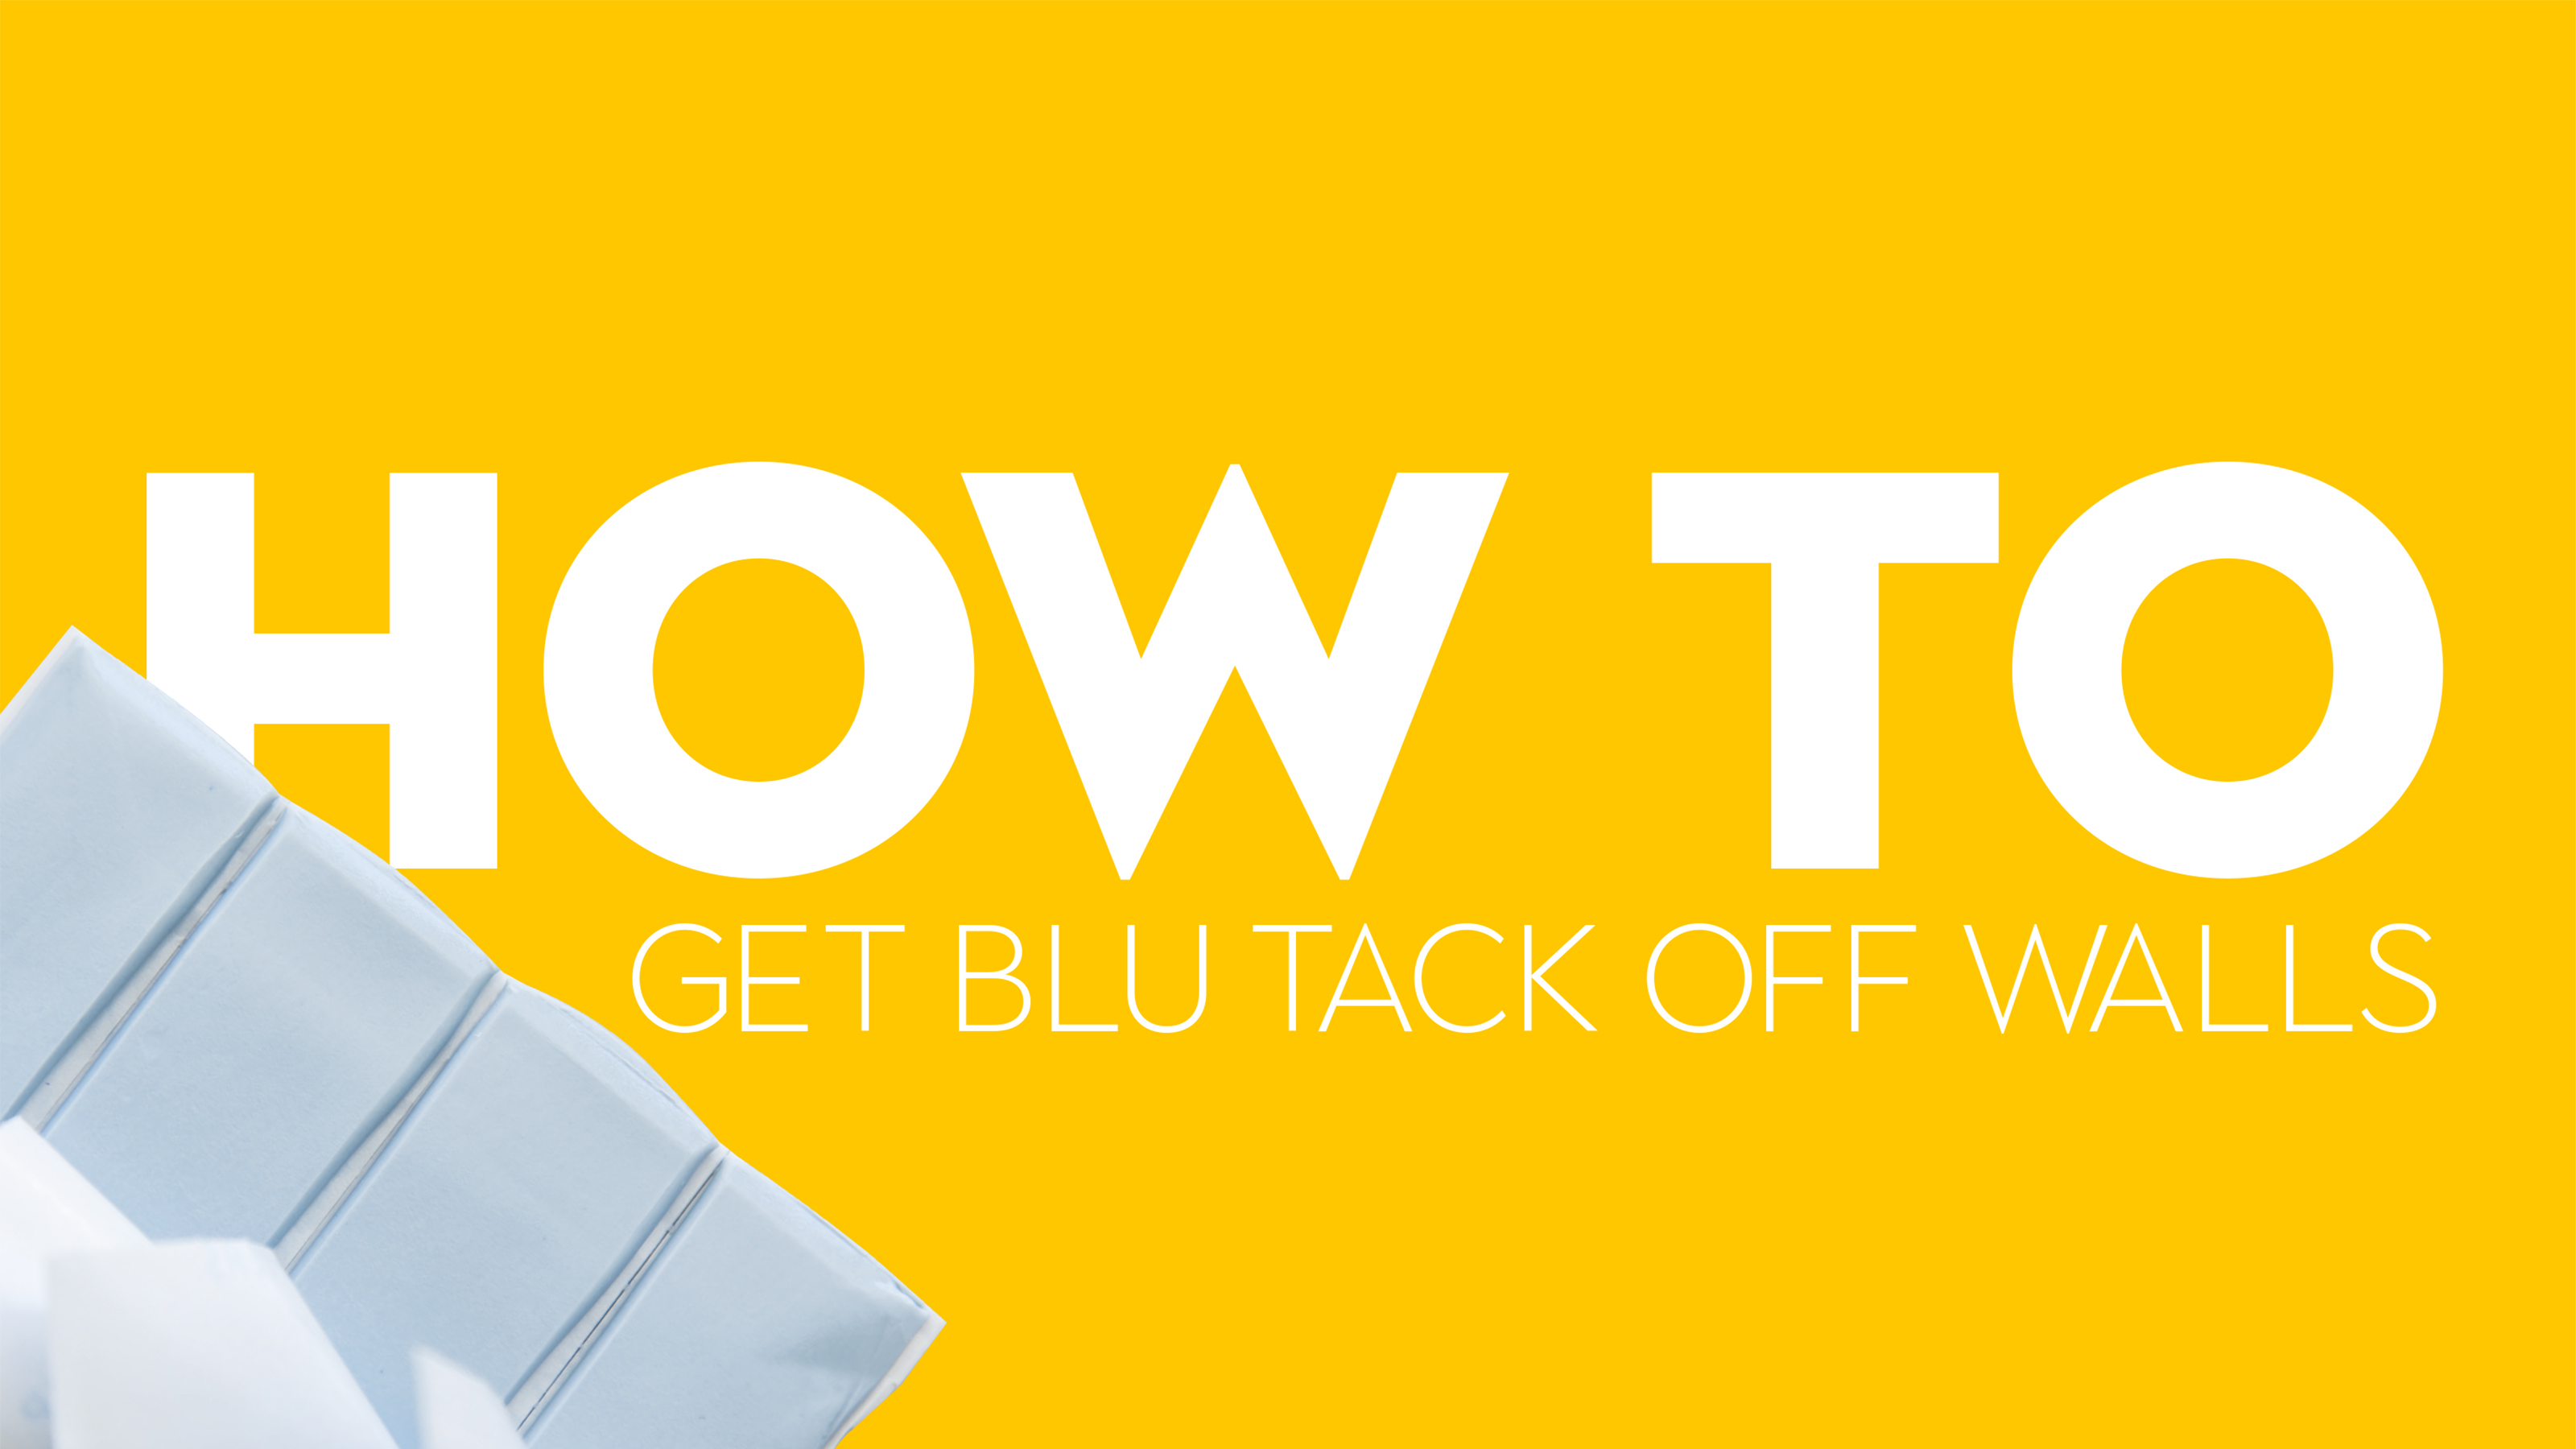 How To Remove Blu Tack Stains From Wall